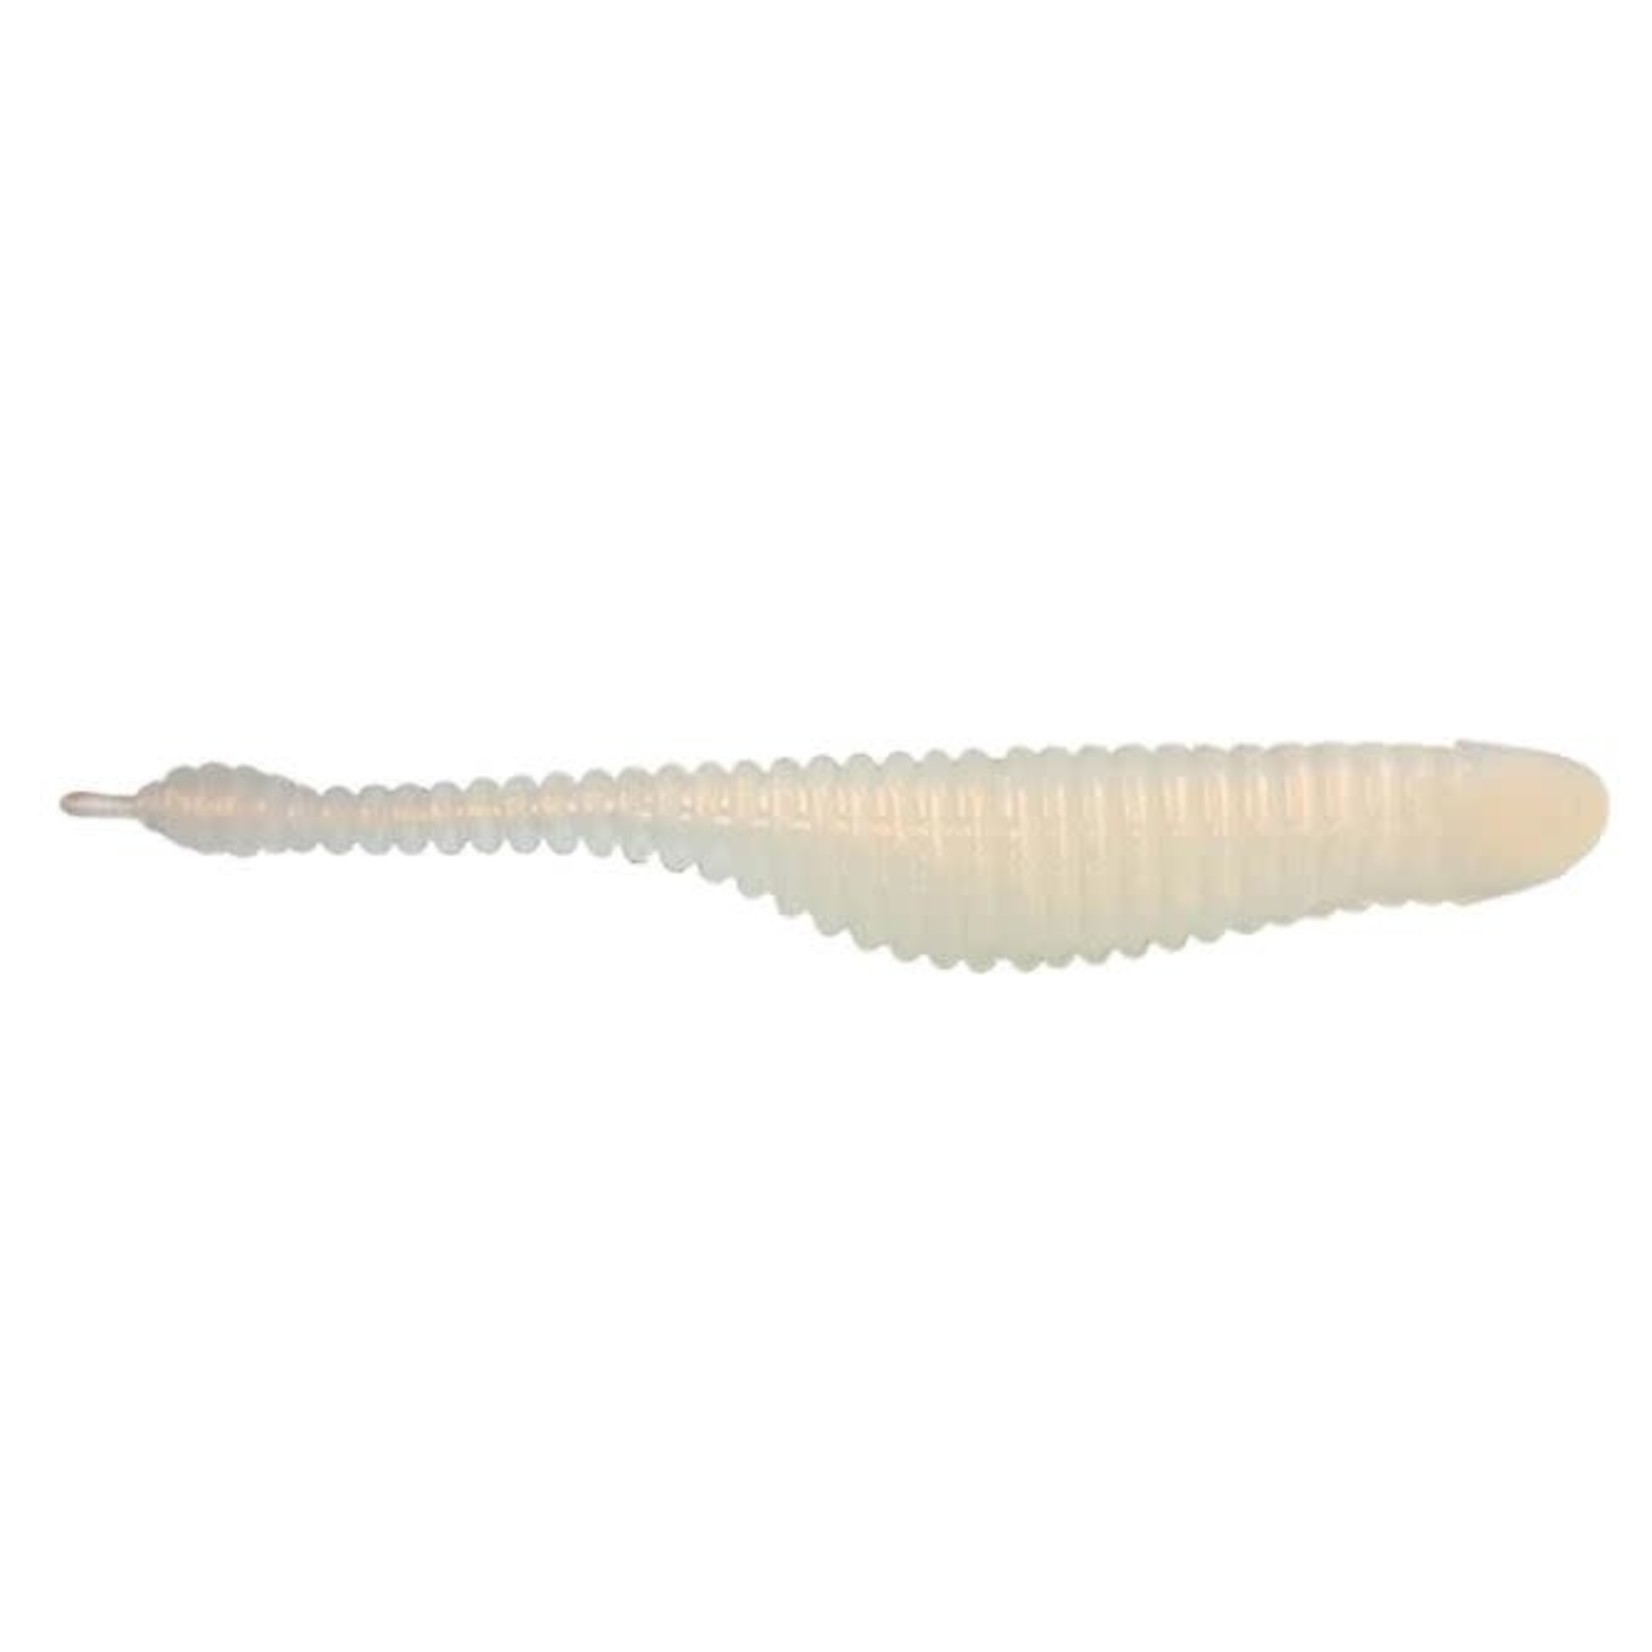 Great Lakes Finesse Great Lakes Finesse 2.75" Drop Minnow